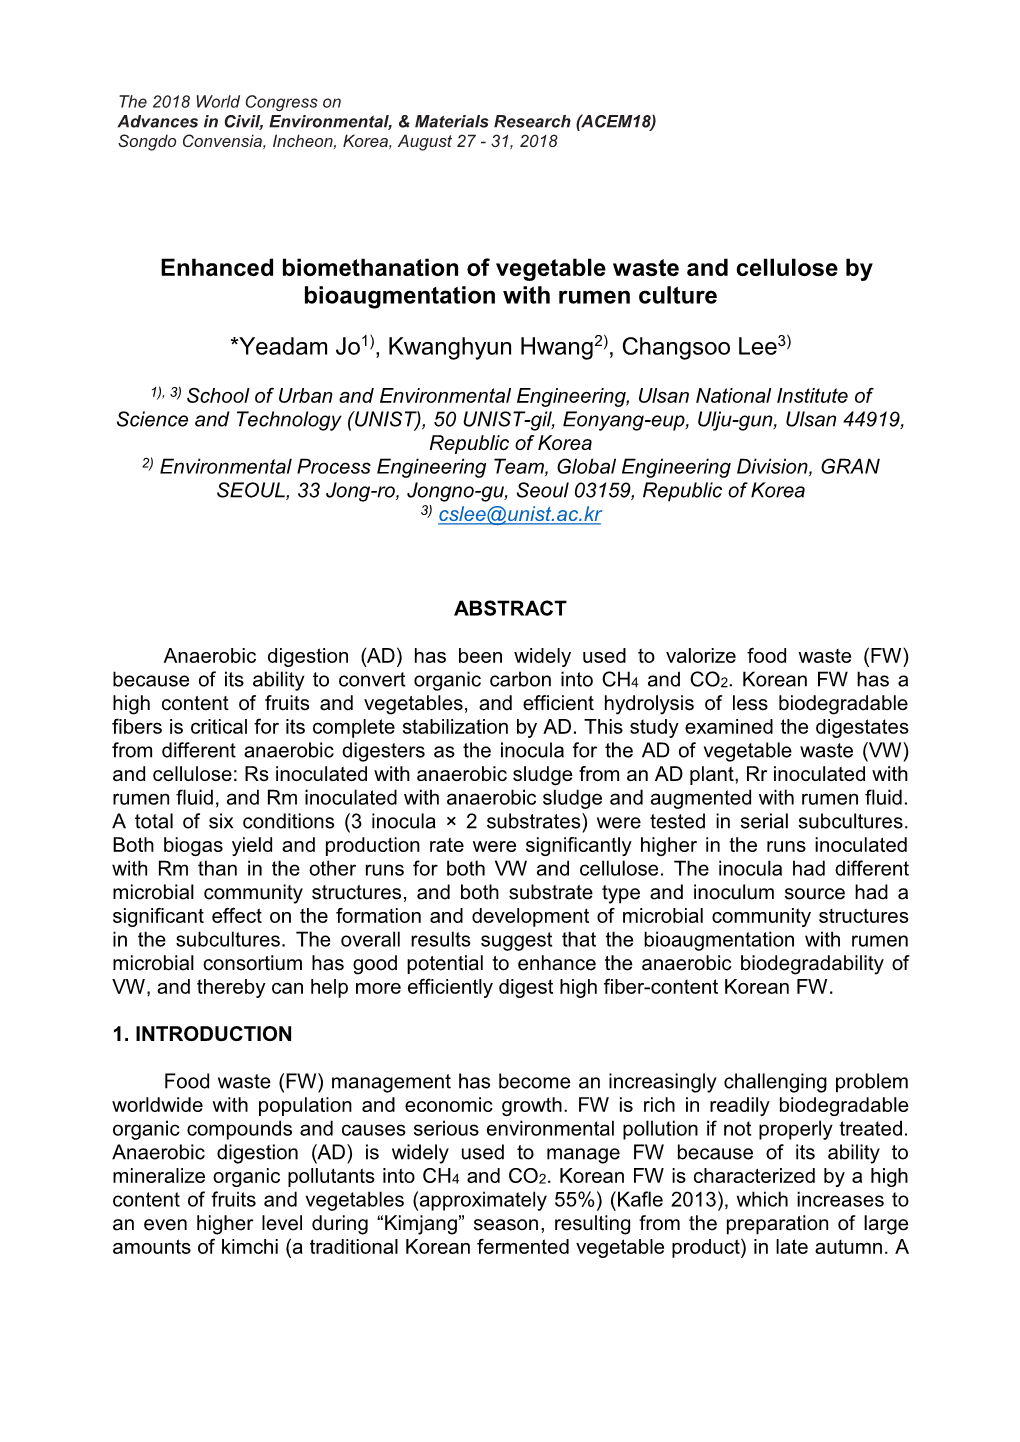 Enhanced Biomethanation of Vegetable Waste and Cellulose by Bioaugmentation with Rumen Culture *Yeadam Jo1), Kwanghyun Hwang2)